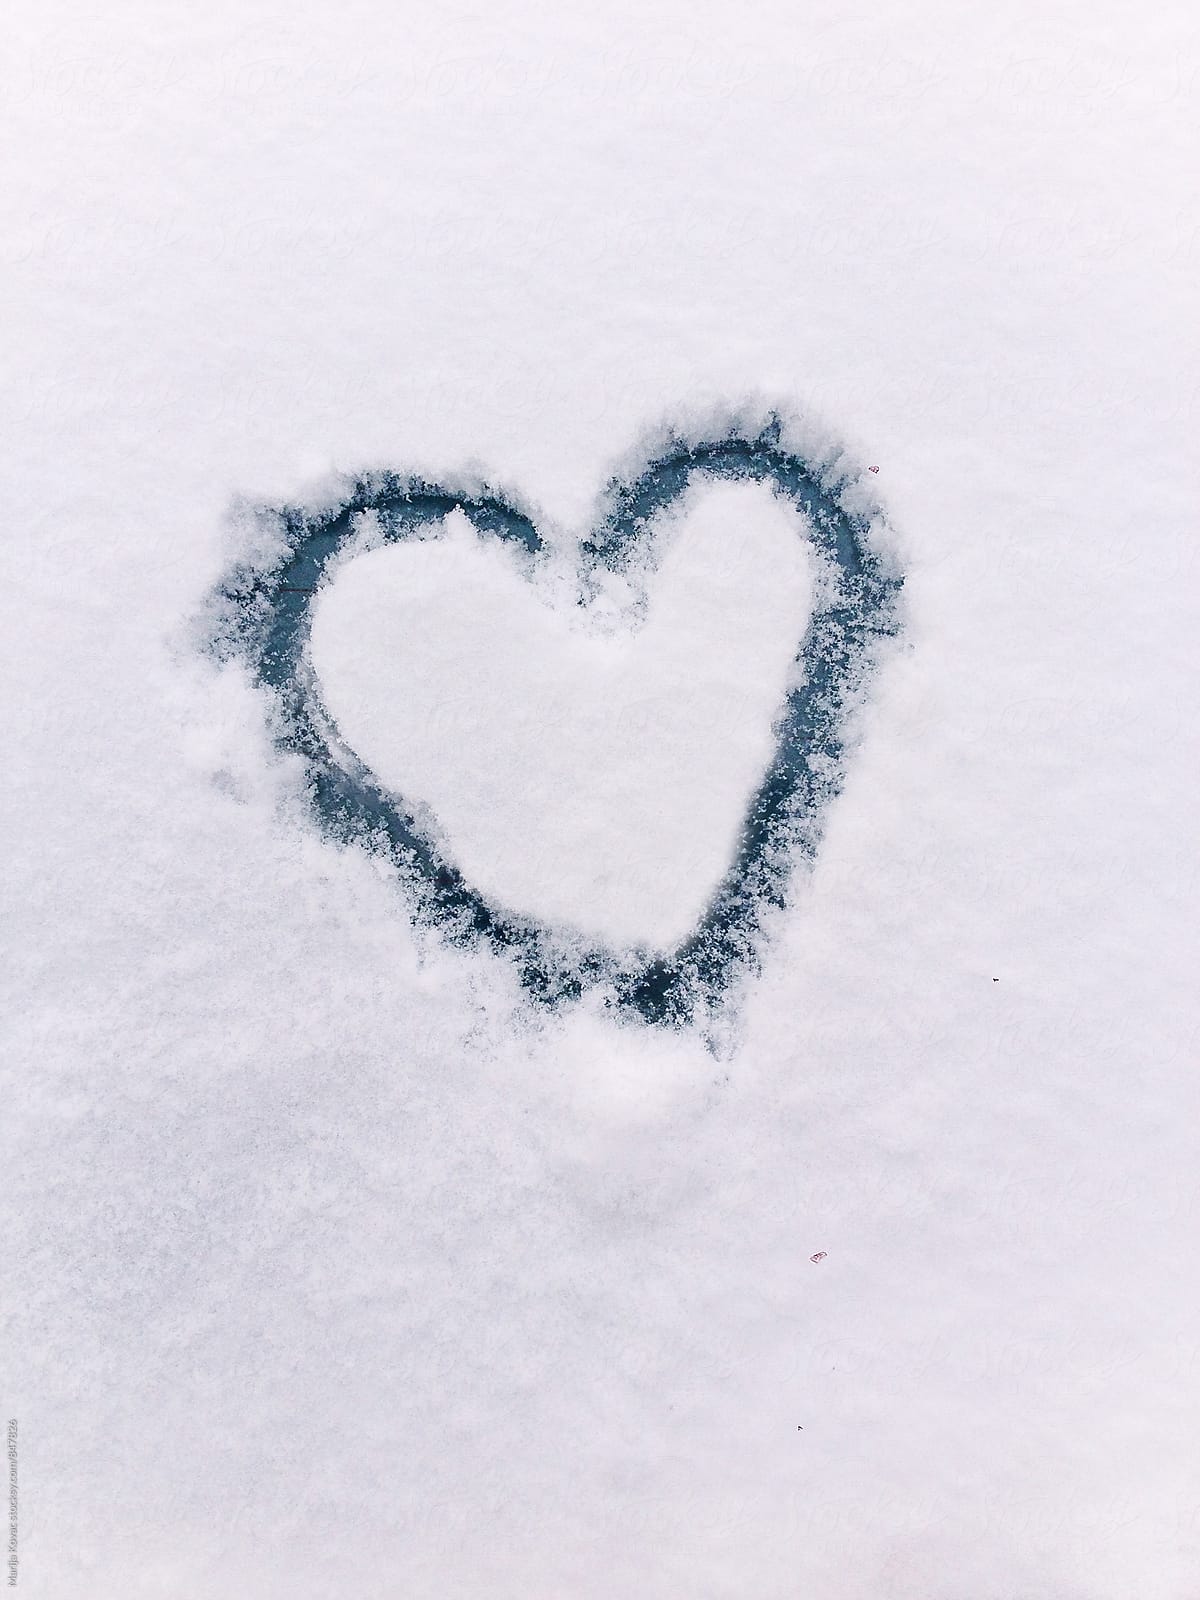 Heart drawn in a snow